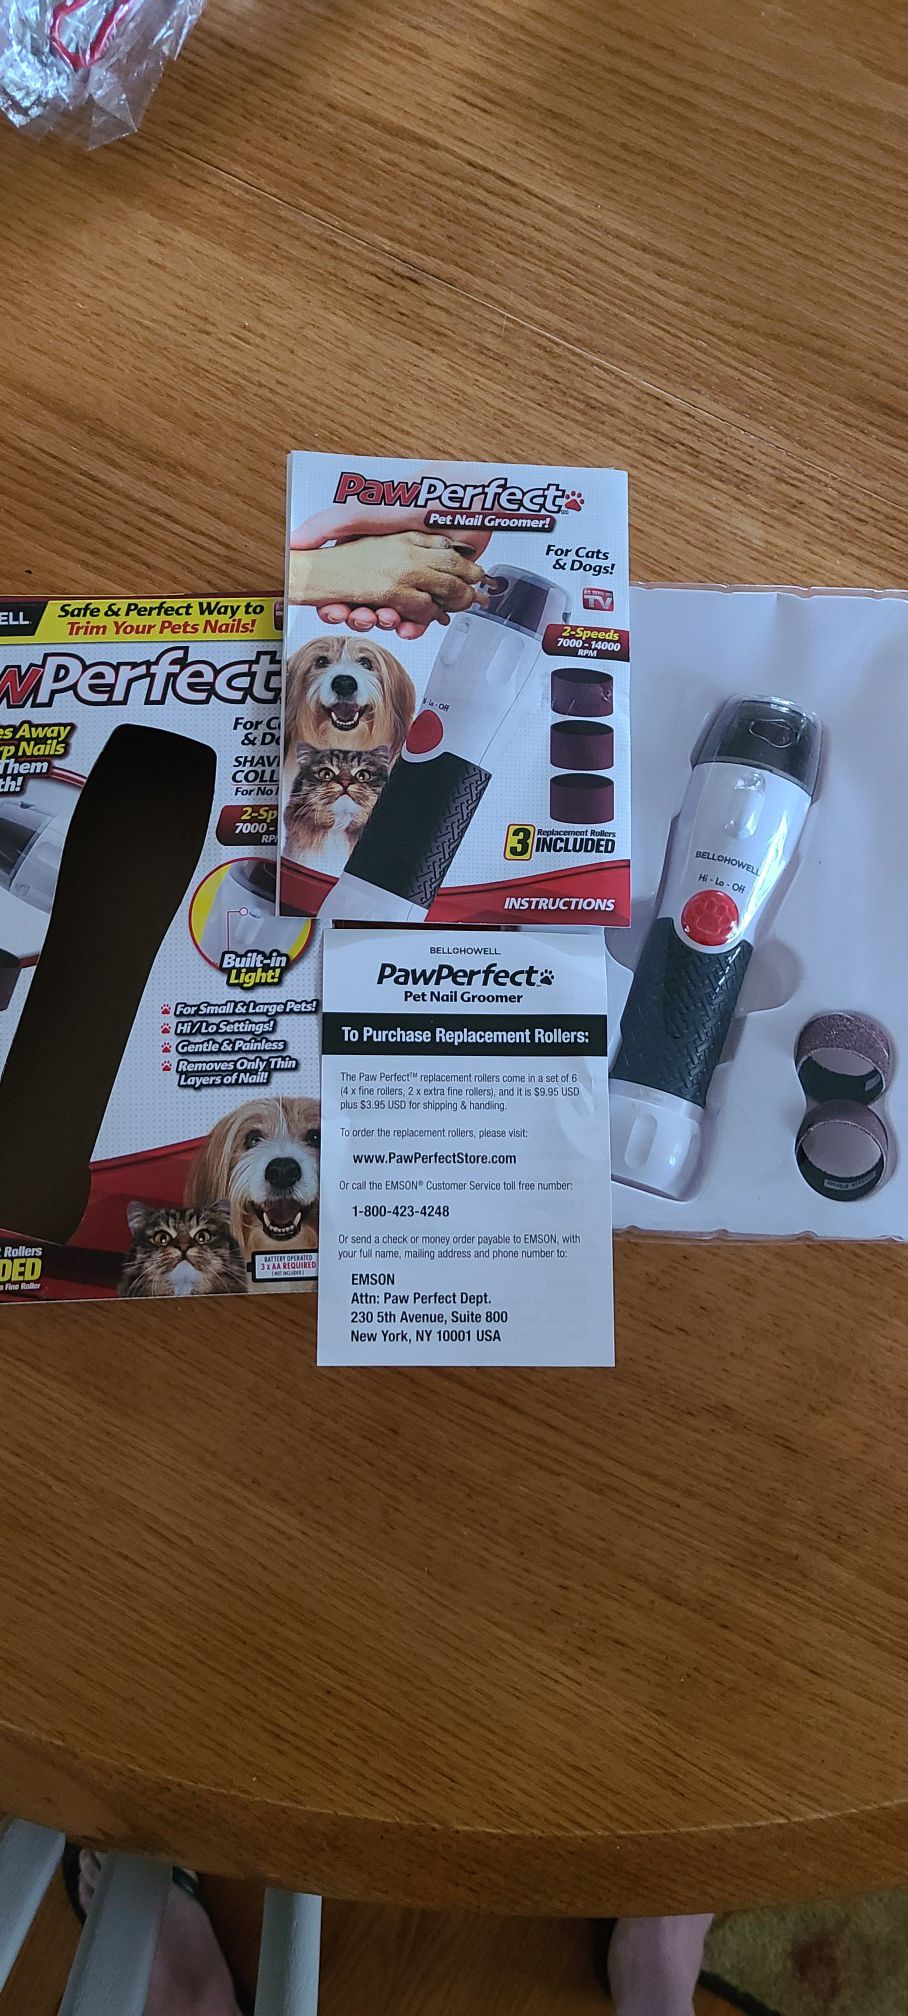 PAWPERFECT 🐕‍🦺 BY BELL and Howell. Dog and Cat Nail Filer. Has 3 Replacement Rollers